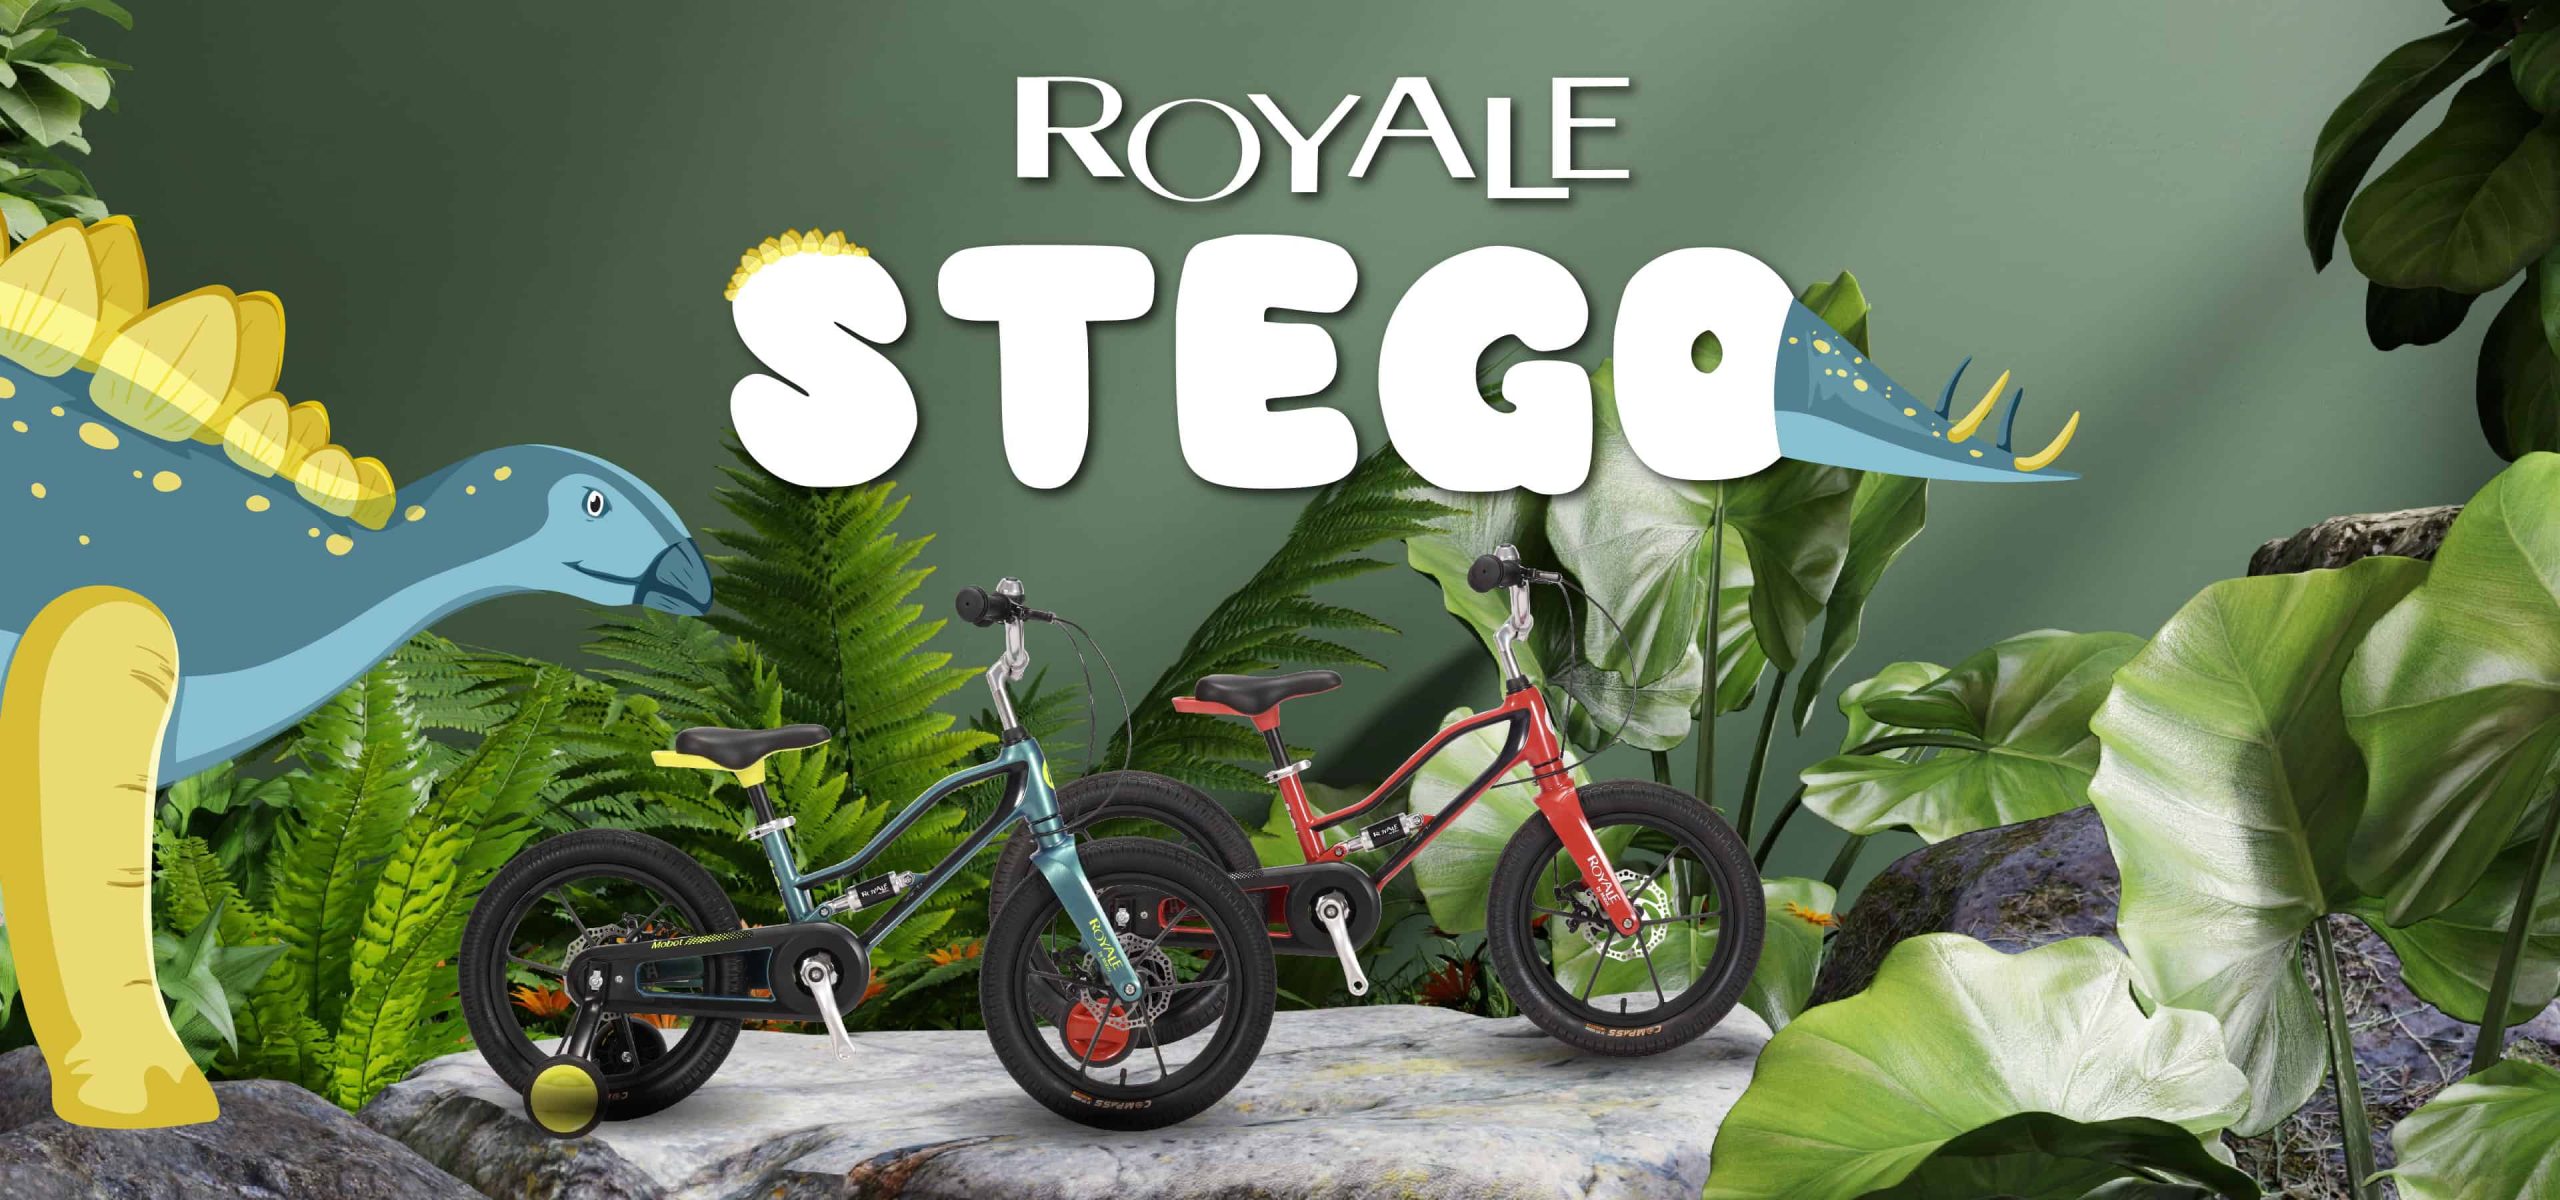 ROYALE Stego 3840x1800 1 scaled - Home